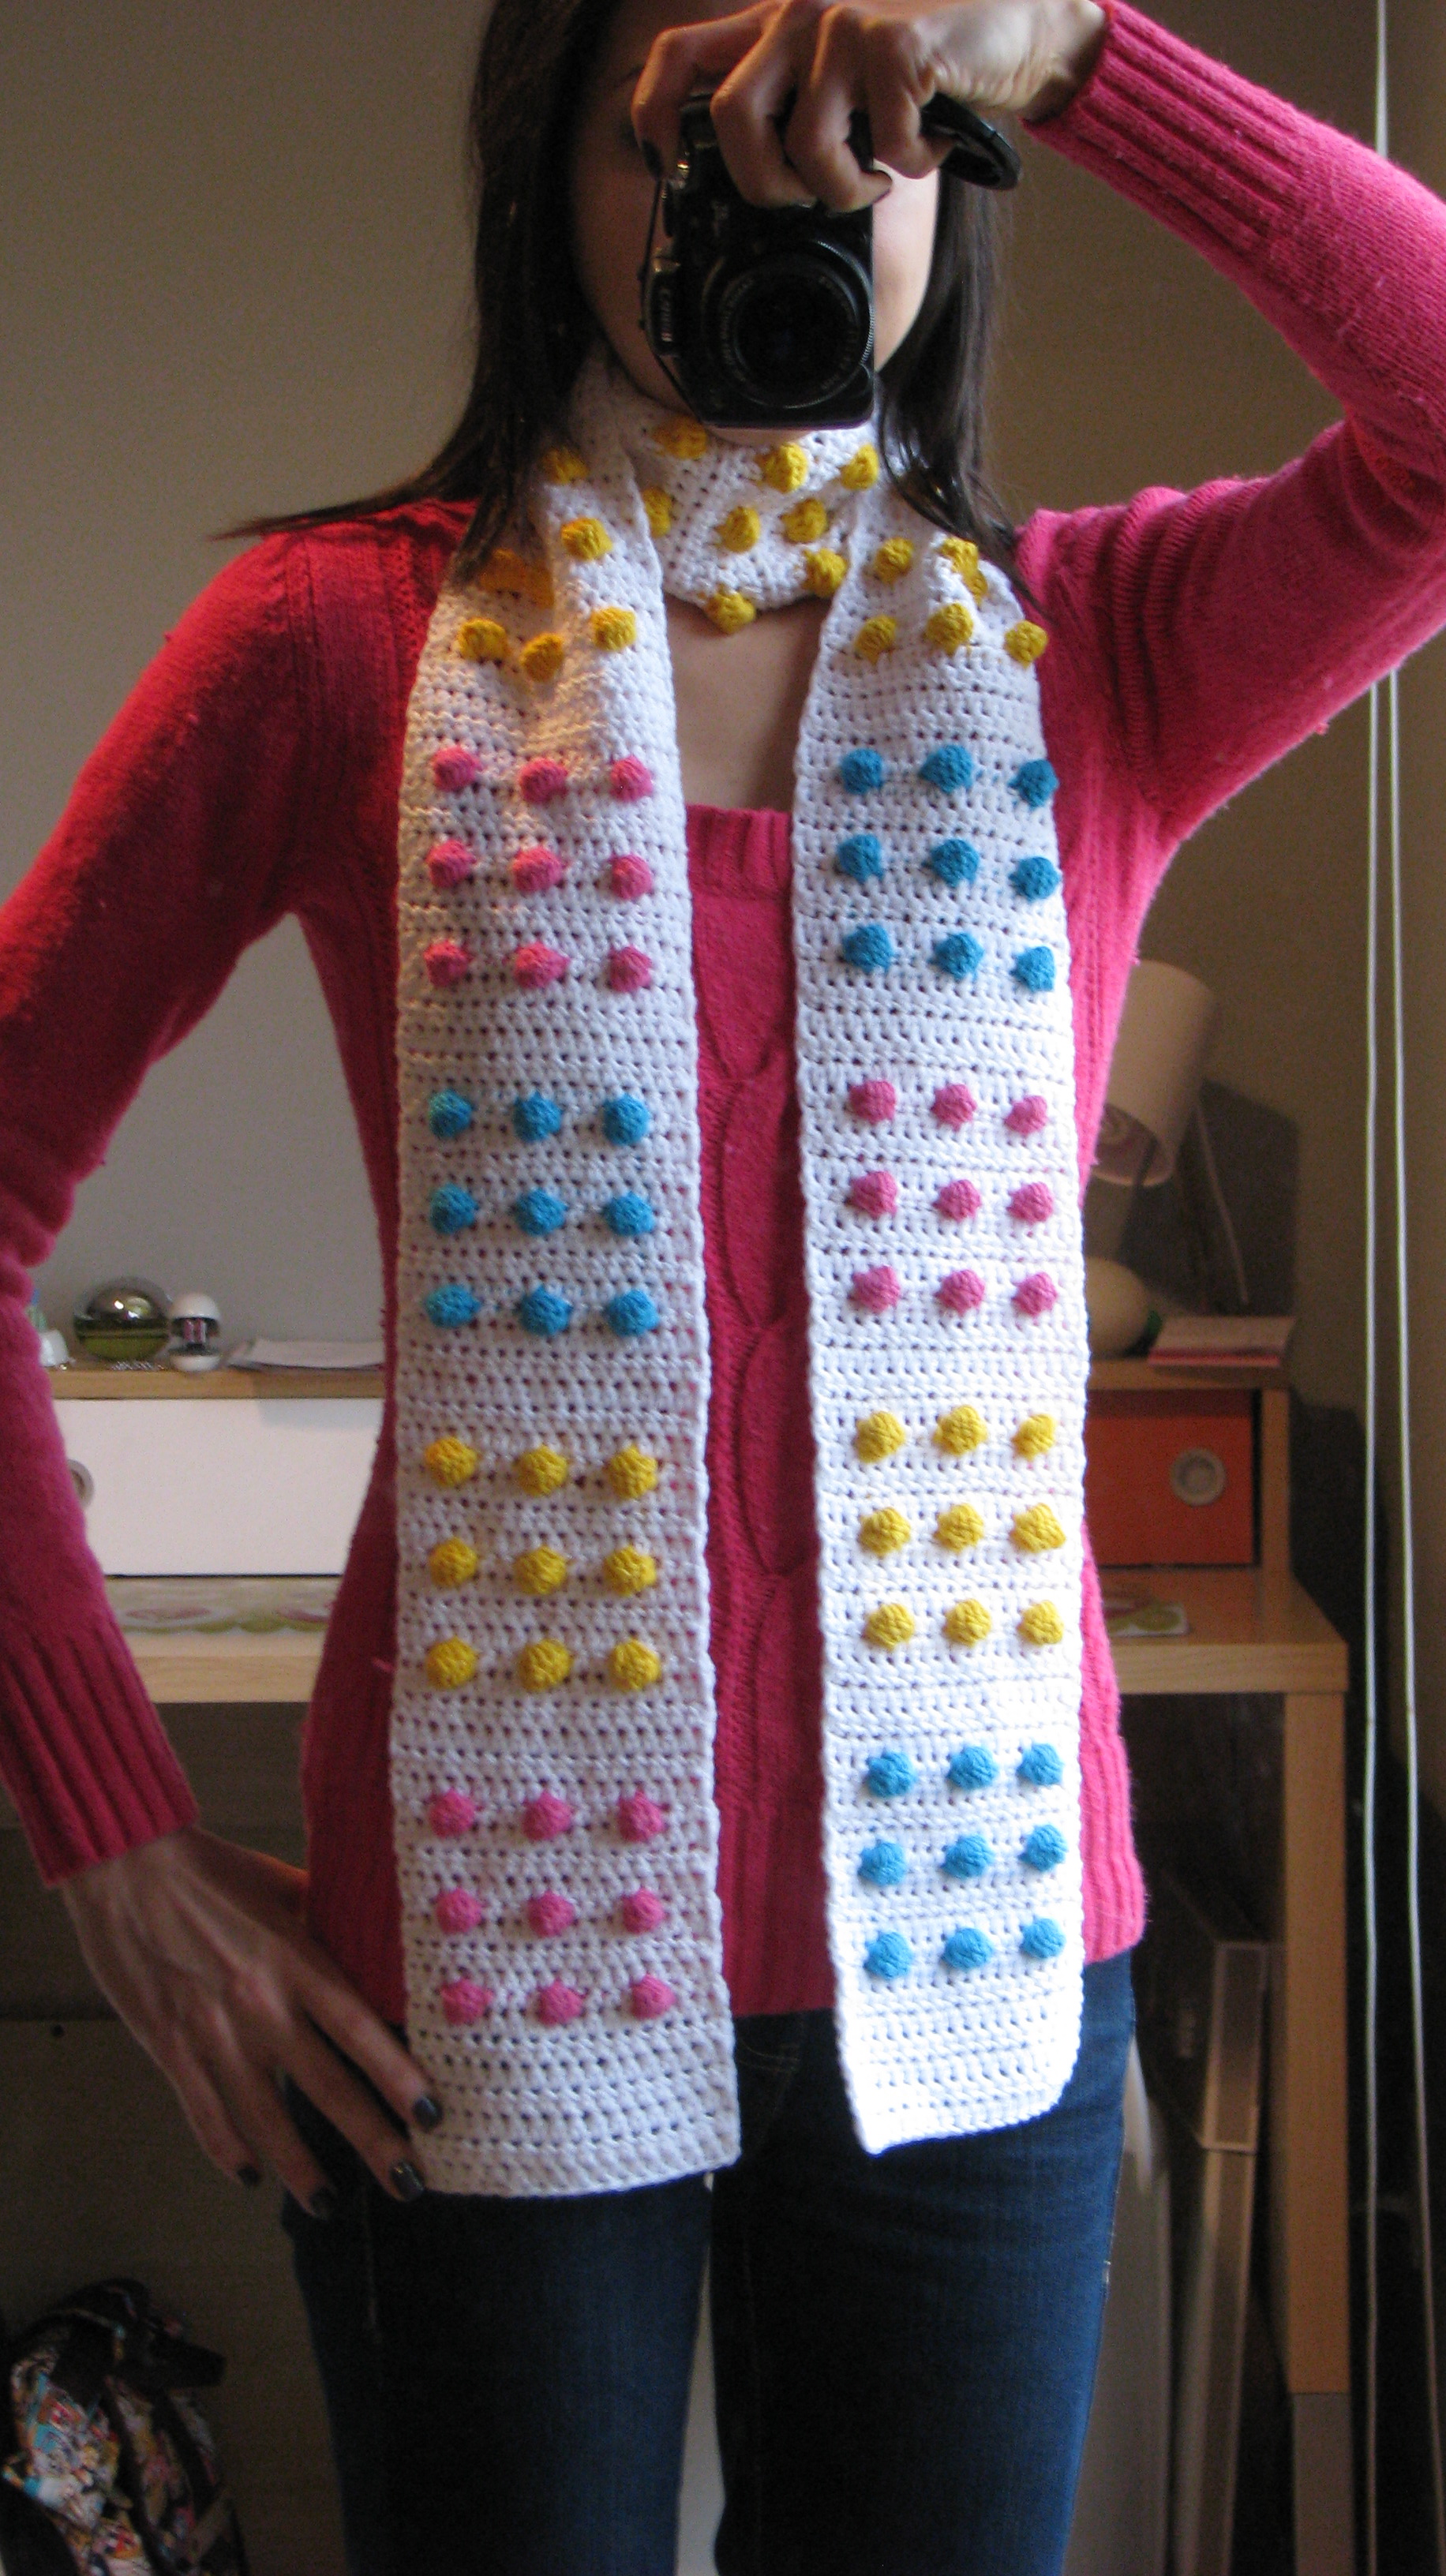 Cute Crochet Candy Button Scarf, You Can Make One Too!